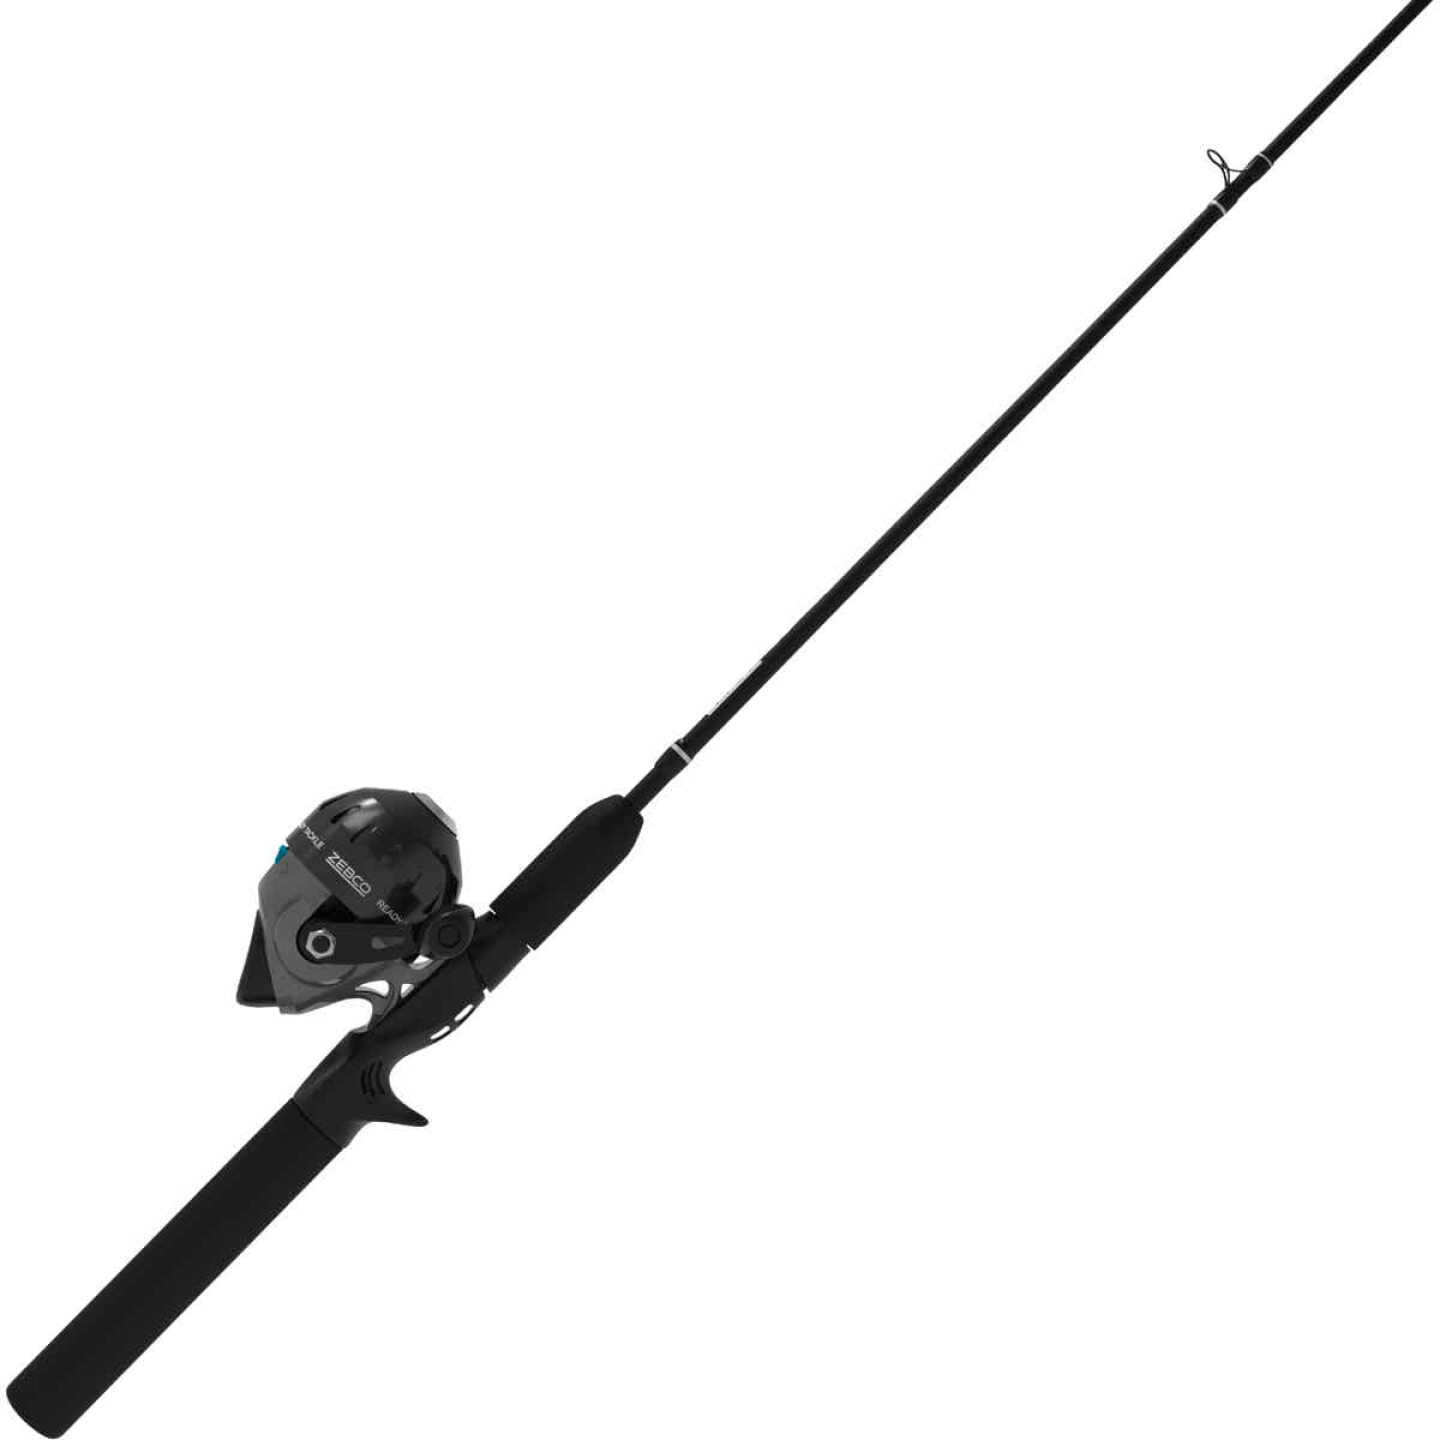 Zebco Ready Tackle 5 Ft. 6 In. Z-Glass Fishing Rod & Spincast Reel